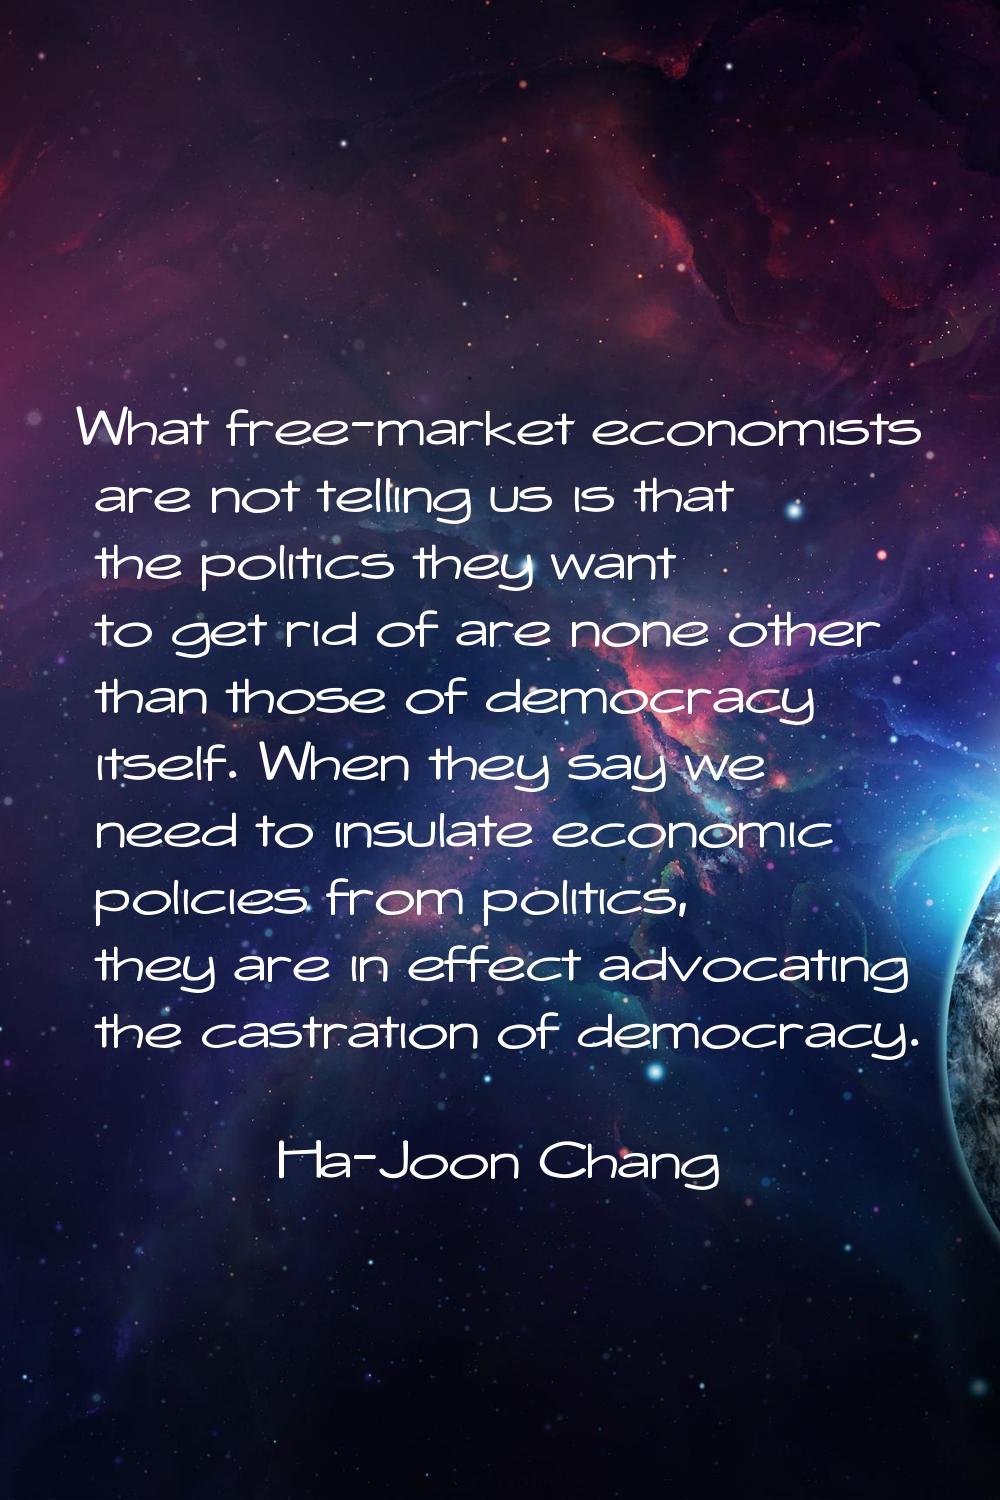 What free-market economists are not telling us is that the politics they want to get rid of are non